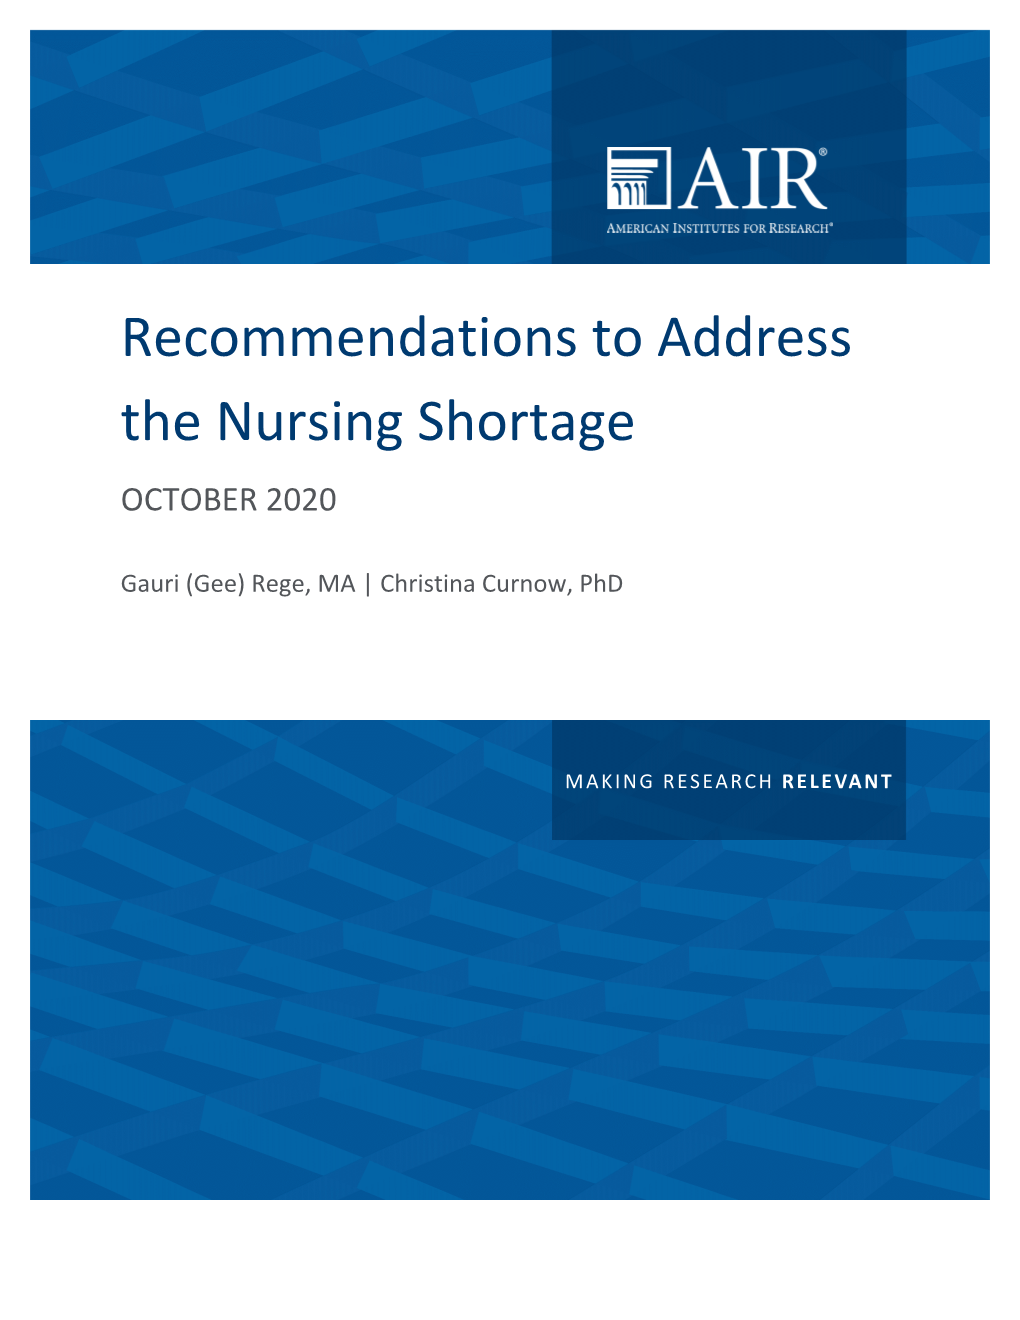 Recommendations to Address the Nursing Shortage OCTOBER 2020